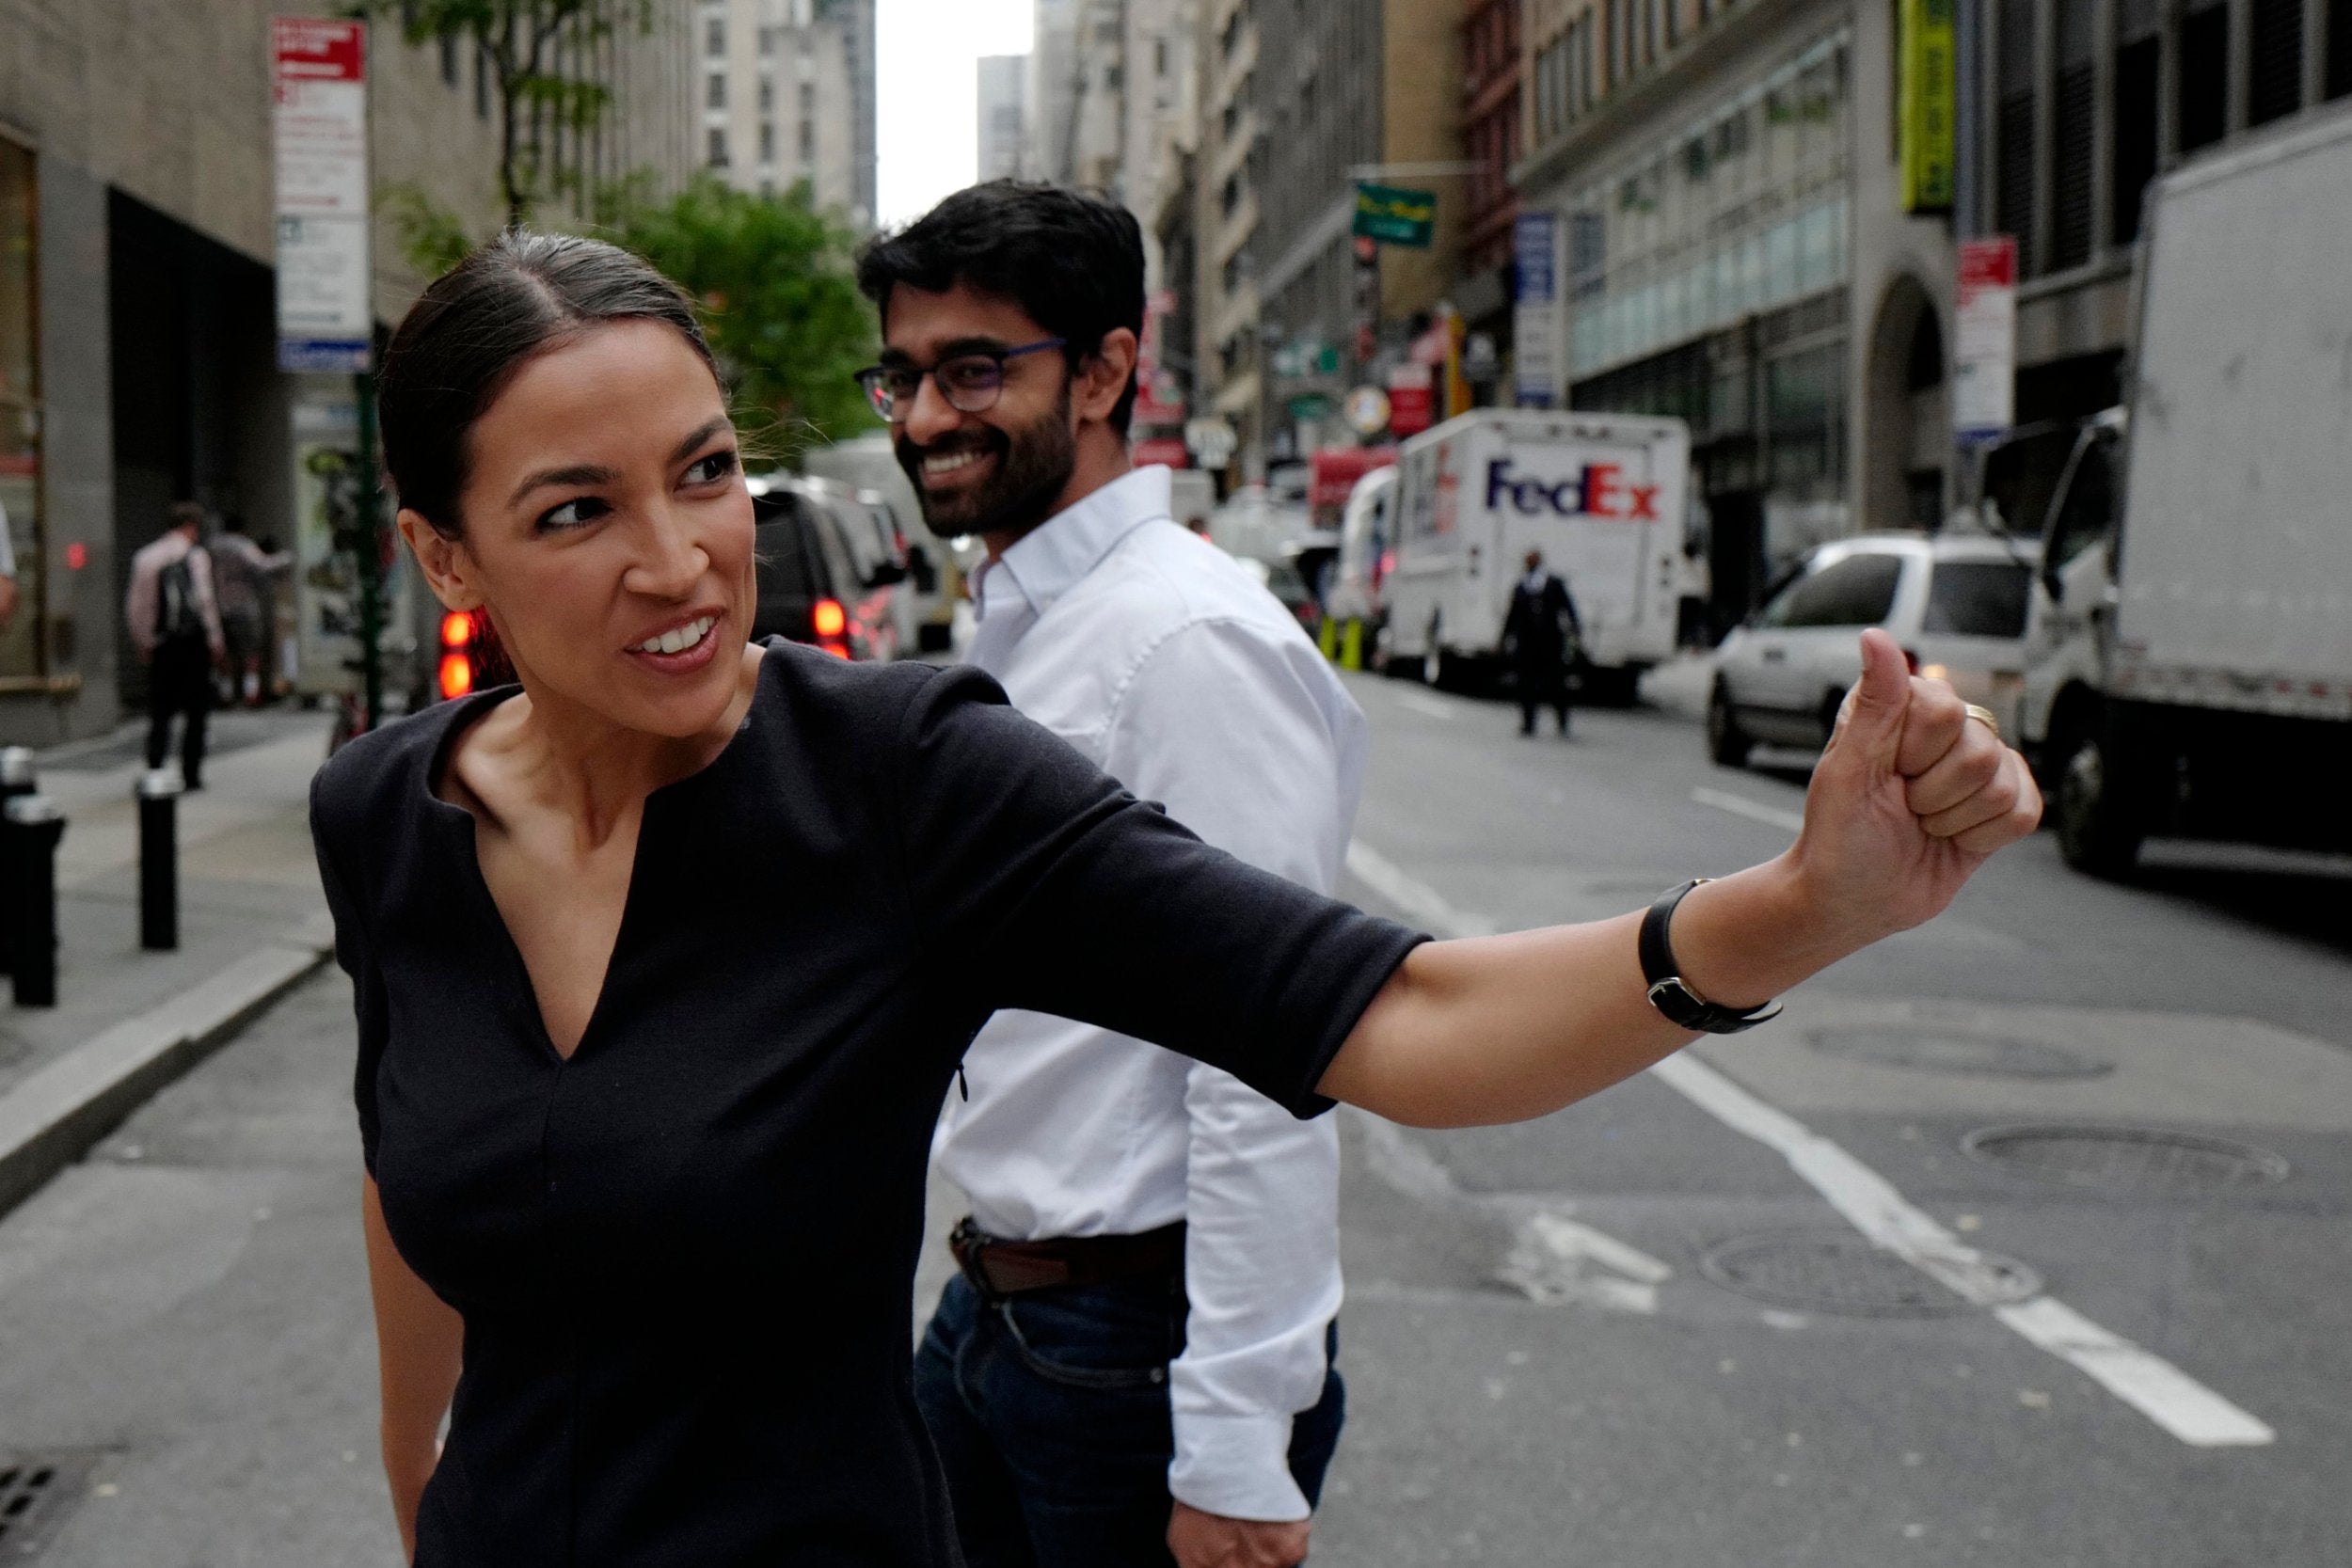 Alexandria Ocasio-Cortez, the winner of a Democratic Congressional primary in New York, reacts to a passerby